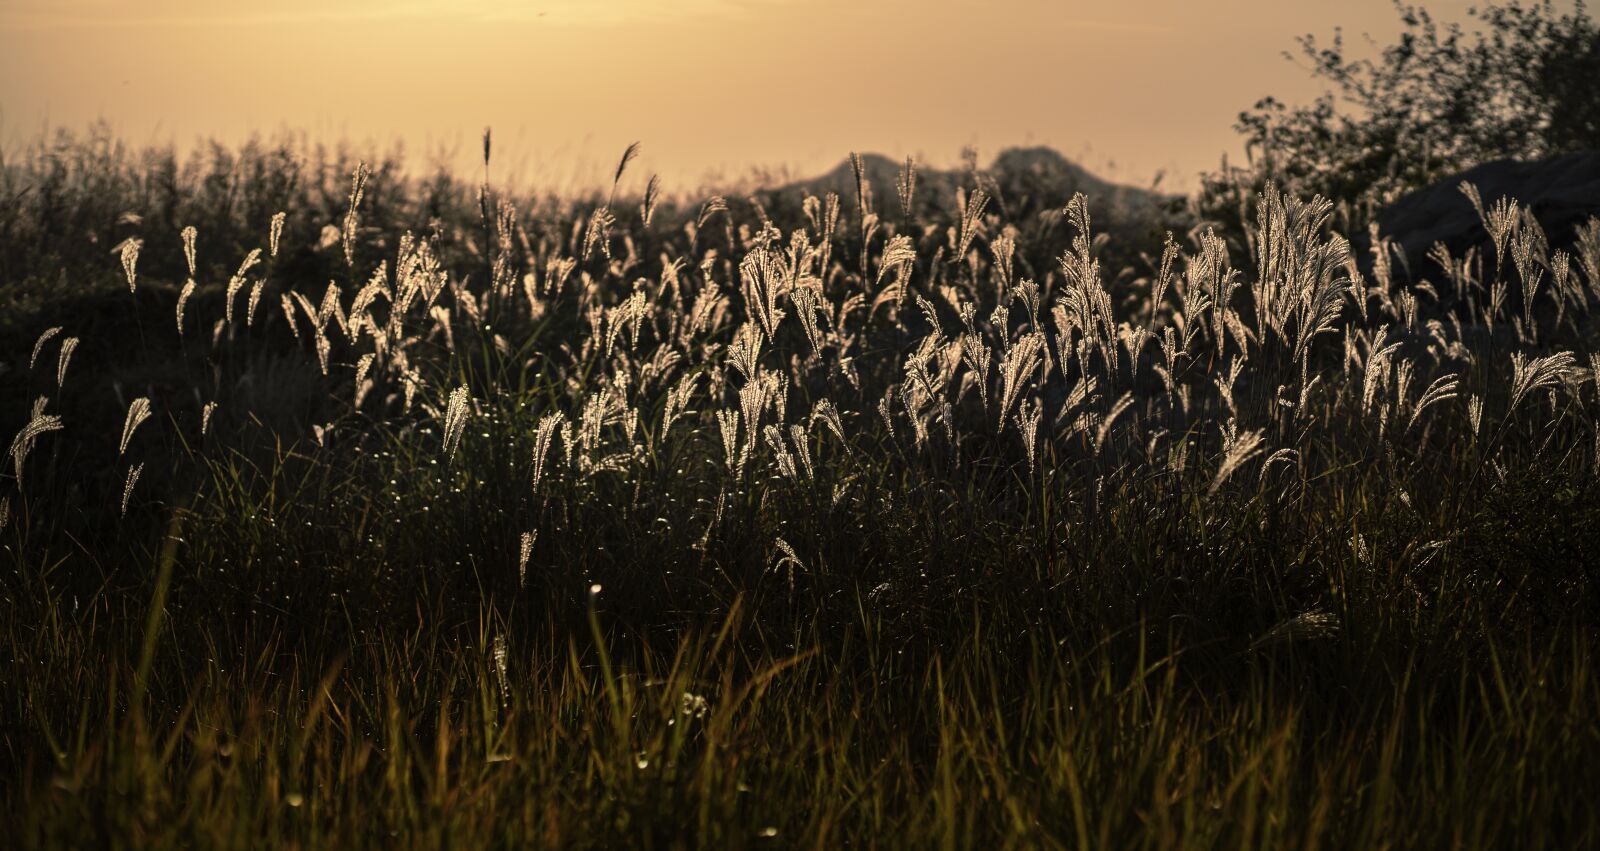 Sony a7 III sample photo. Silver grass, landscape, nature photography